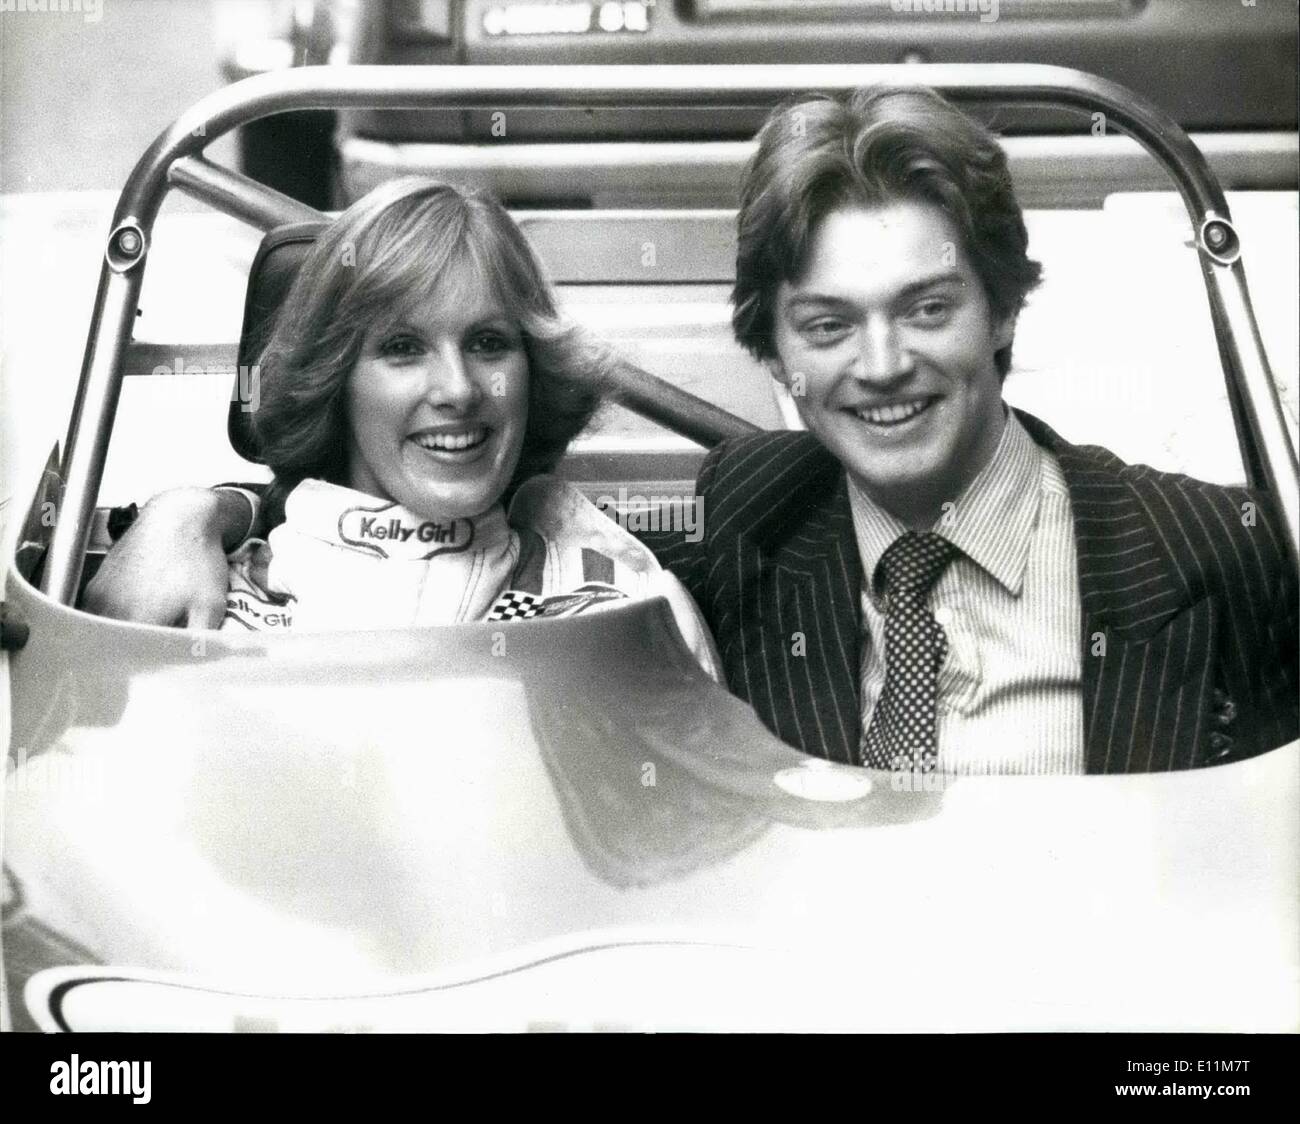 Feb. 02, 1979 - Speedy Wedding Present For Janet Brise: Janet Brise, wife of the late Grand Prix star Tony, who died in the Graham Hill air crash, is to marry Lloyd underwriter John Finch in five days. Today she received her wedding presents a Lola sports car. Janet, aged 26, is hoping to have a successful season in Motor Racing she took up the sport only nine months ago-and will compete in twenty races around the Country,. The highlight of her career will be an appearance in the Marlbone Daily Mail race of champions on March 14th at Brands Hatch Stock Photo